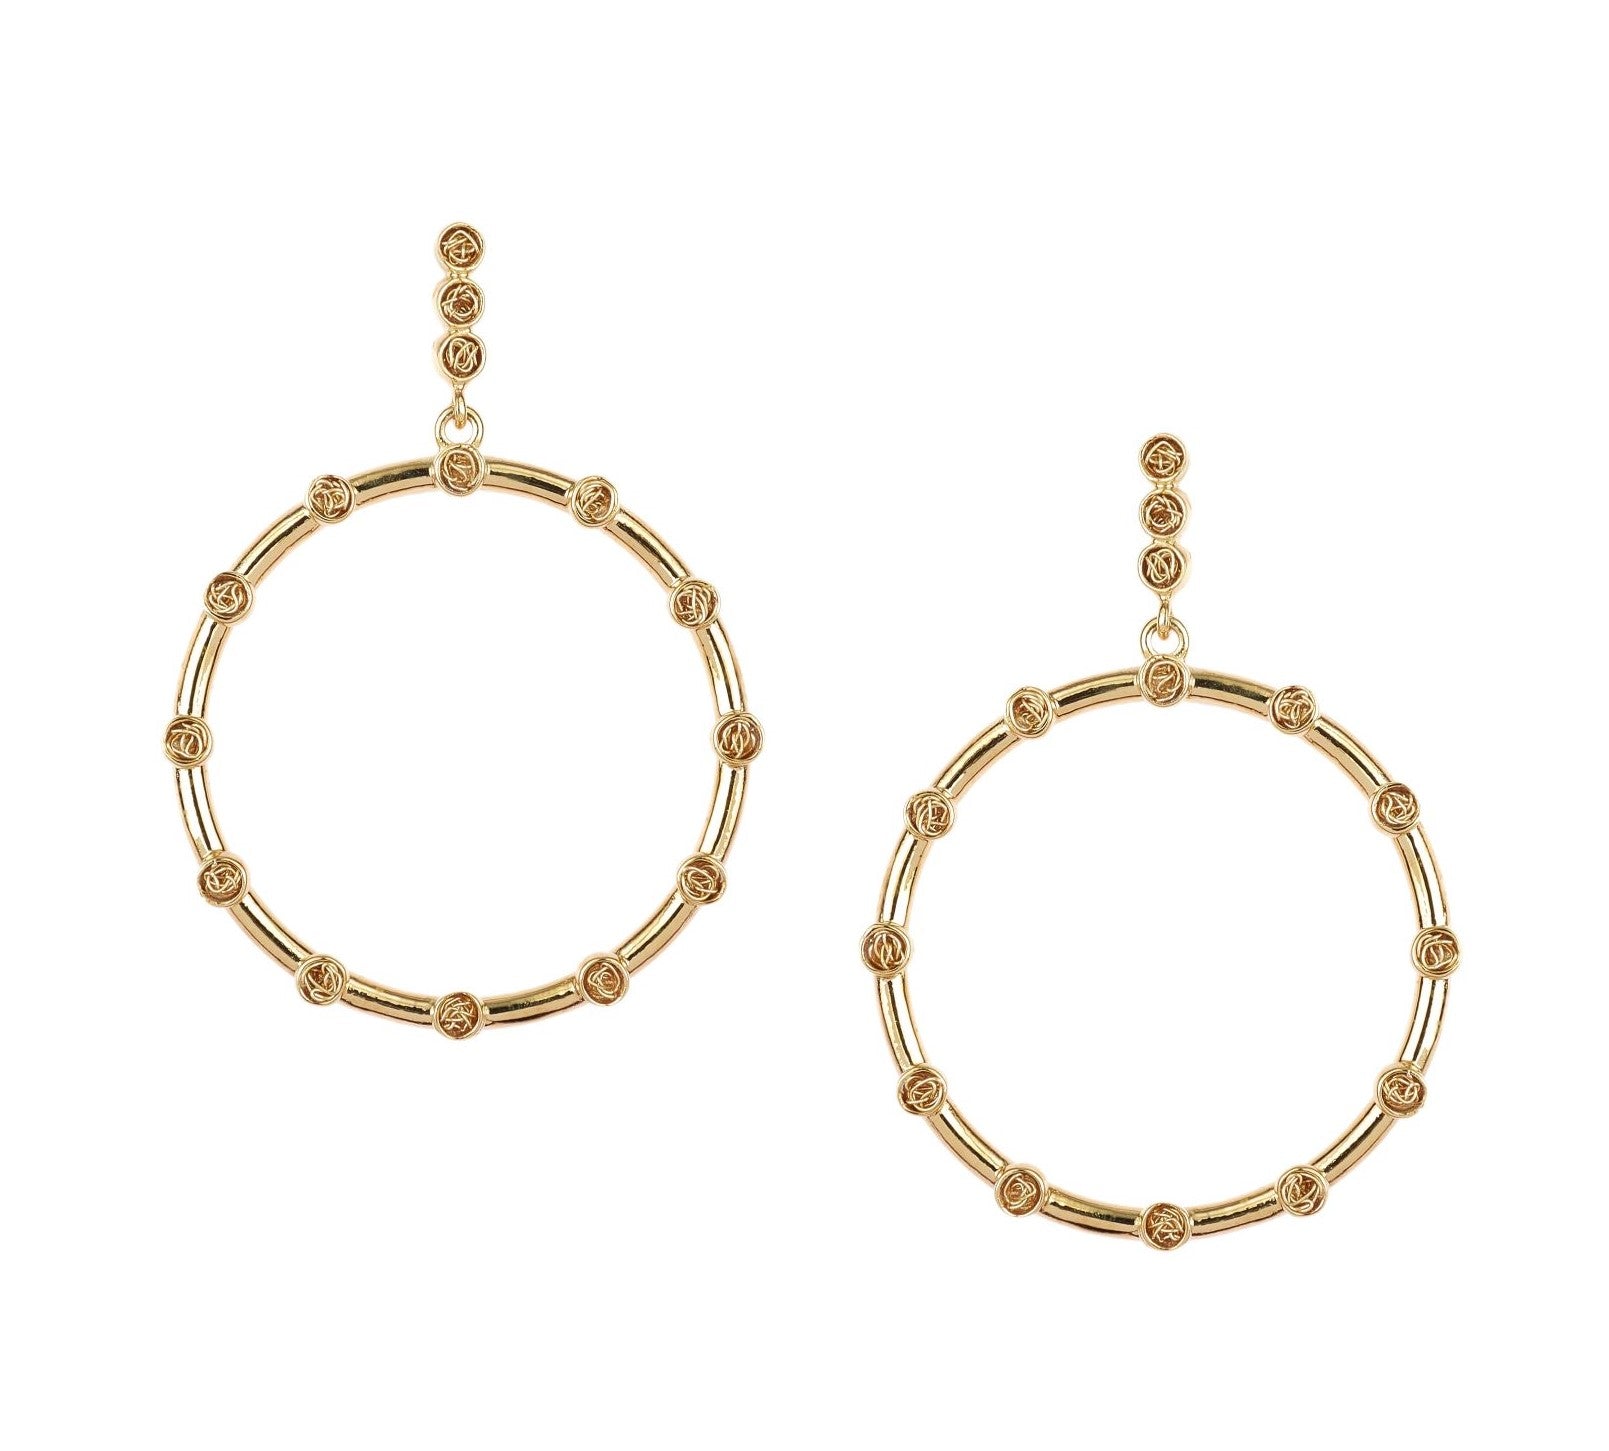 Unique statement gold hoop earrings showcasing a modern silhouette and a touch of artisanal crochet artistry.